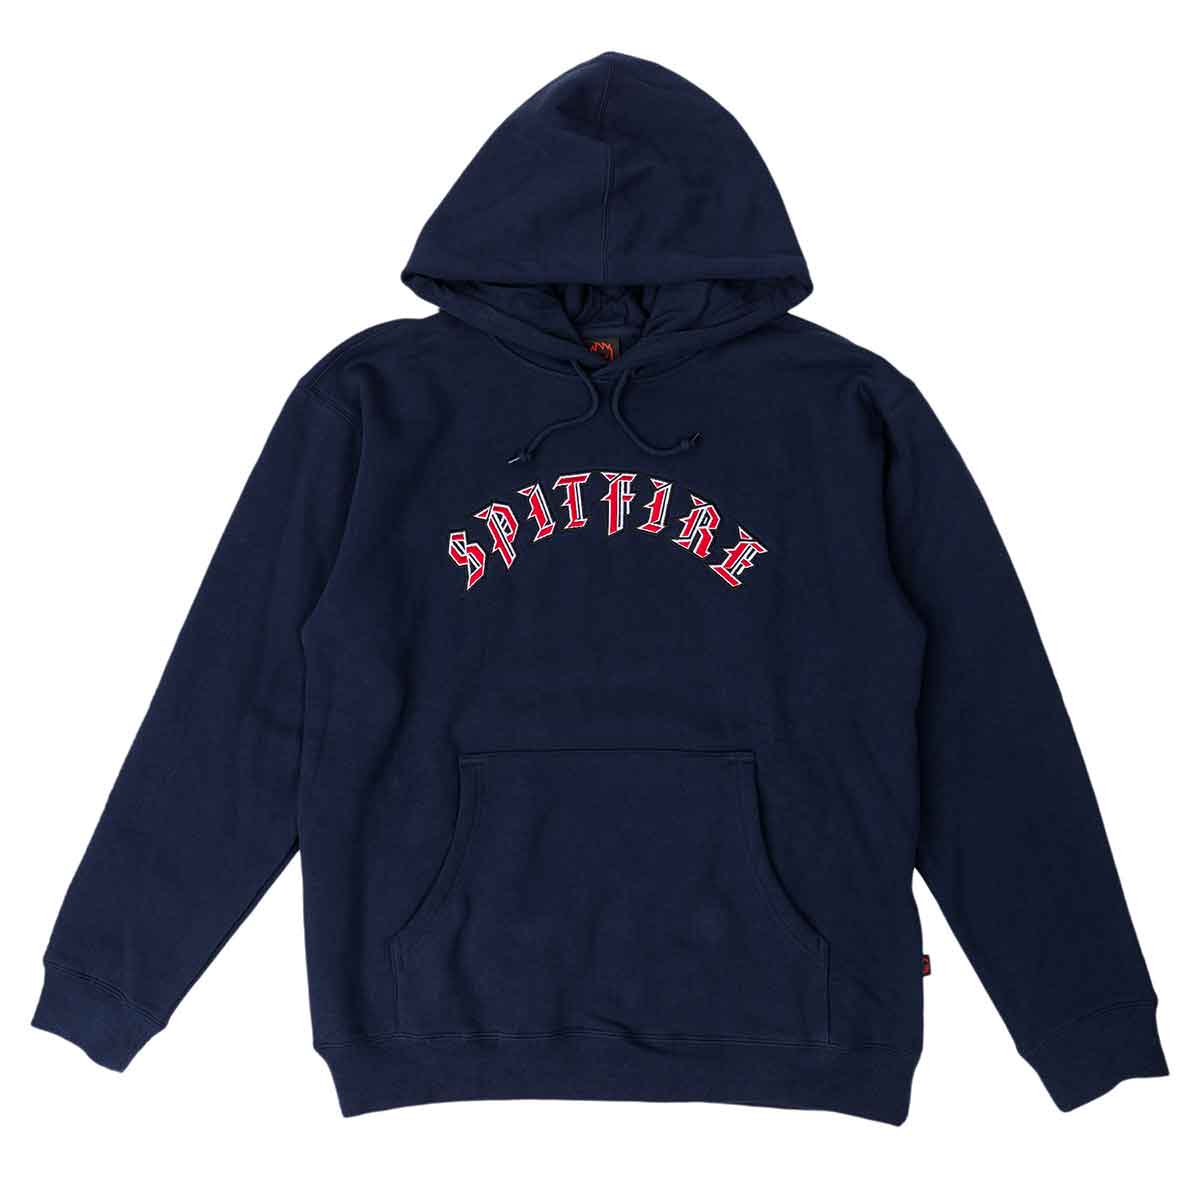 SPITFIRE OLD E EMBROIDERED HOODIE NAVY